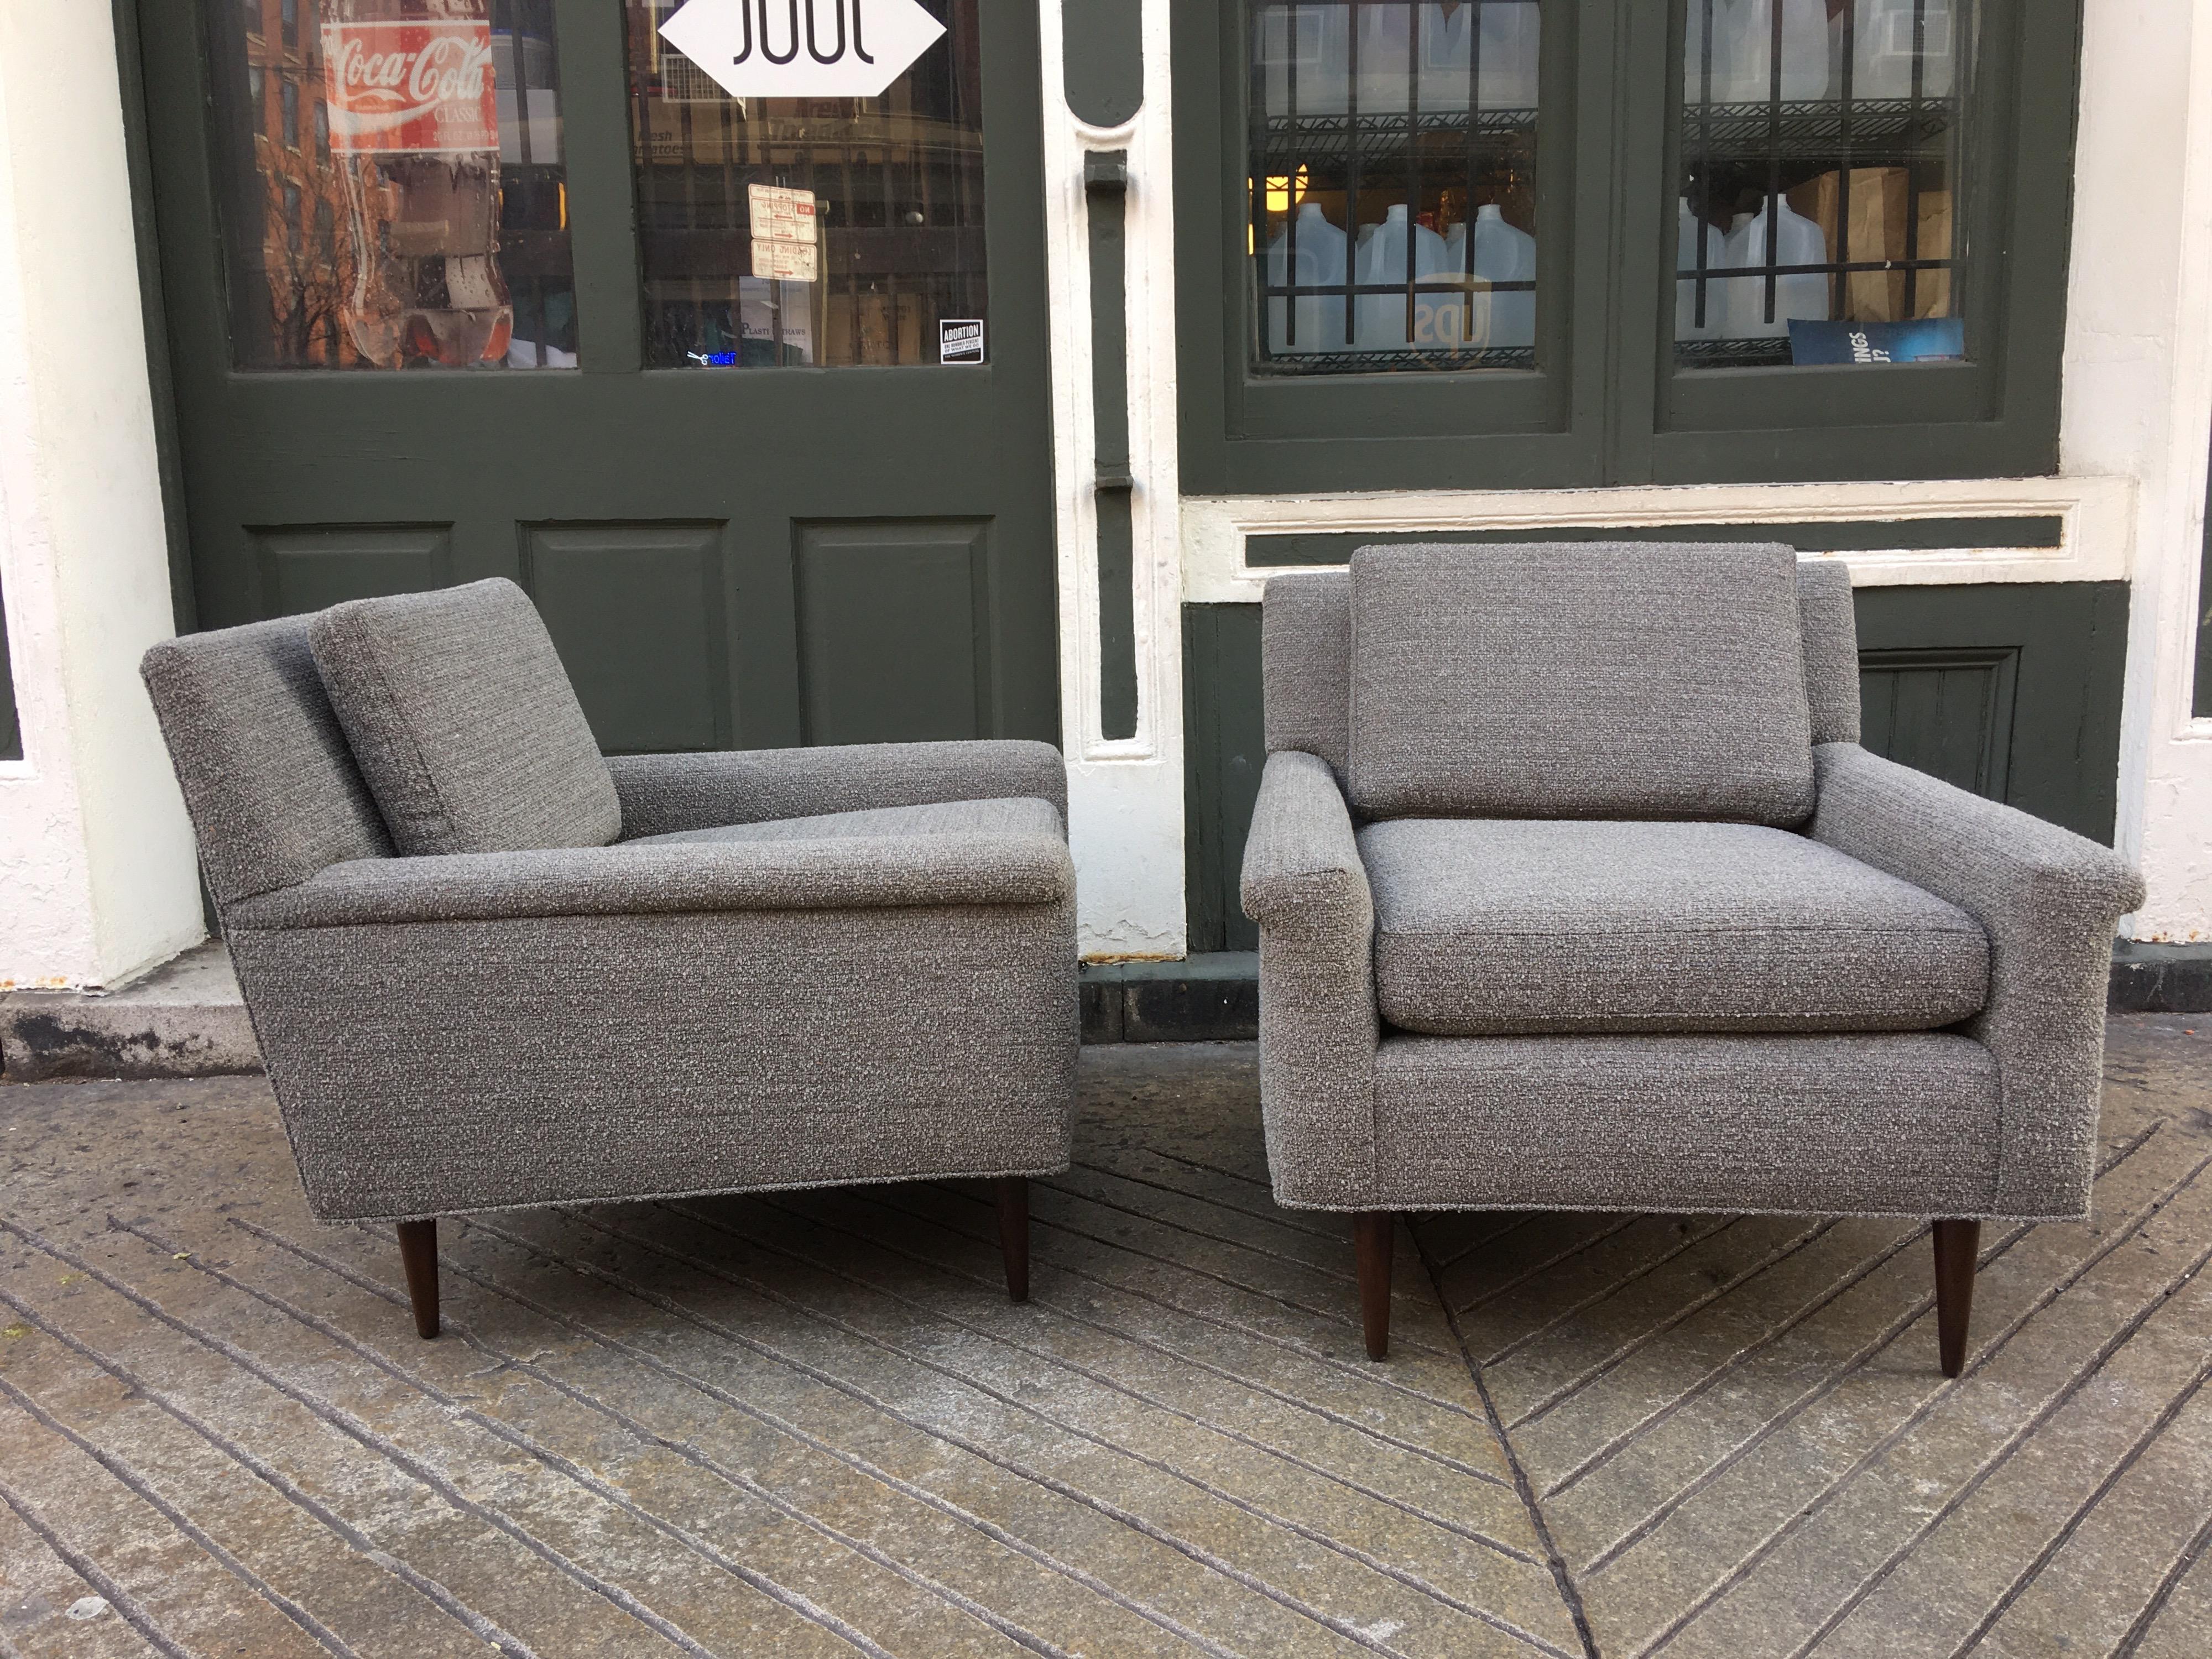 Pair of DUX upholstered lounge chairs, newly upholstered in a nubby gray and white fabric. Walnut legs sit slightly back from corners. Low profile perfect not to block the view!